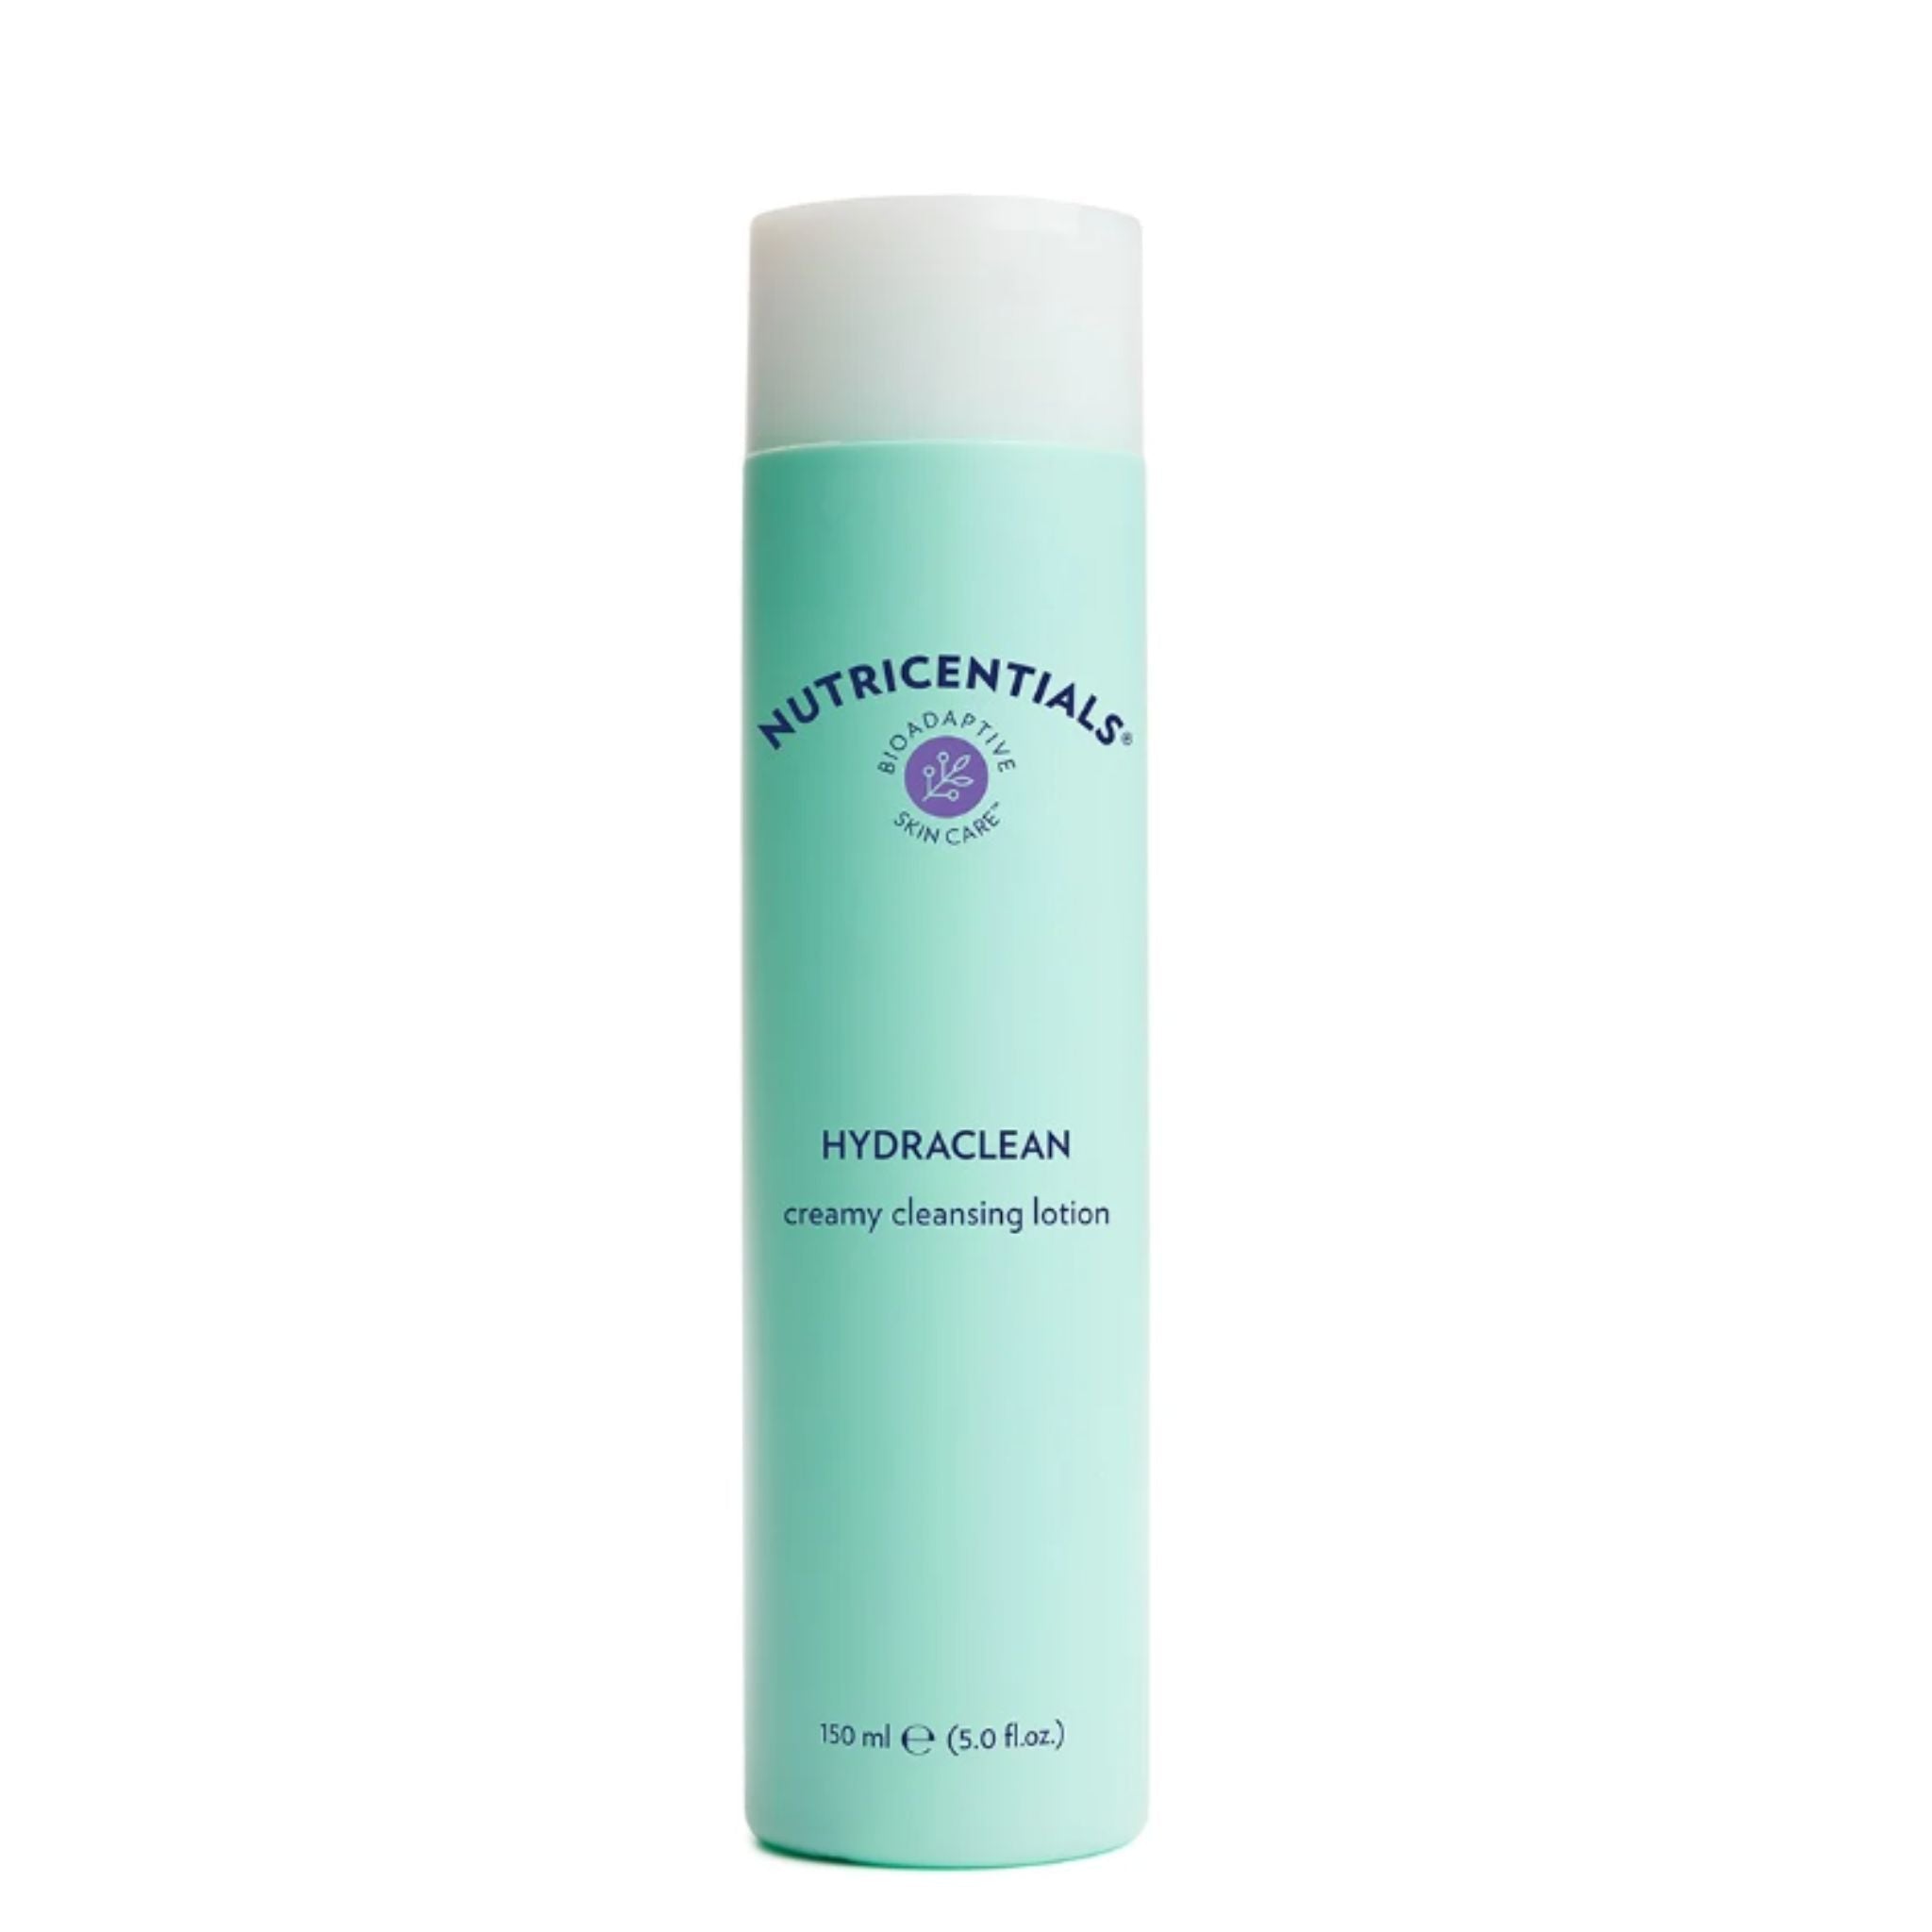 HydraClean Creamy Cleansing Lotion with Licorice, Algae Extracts - thatnatureworld